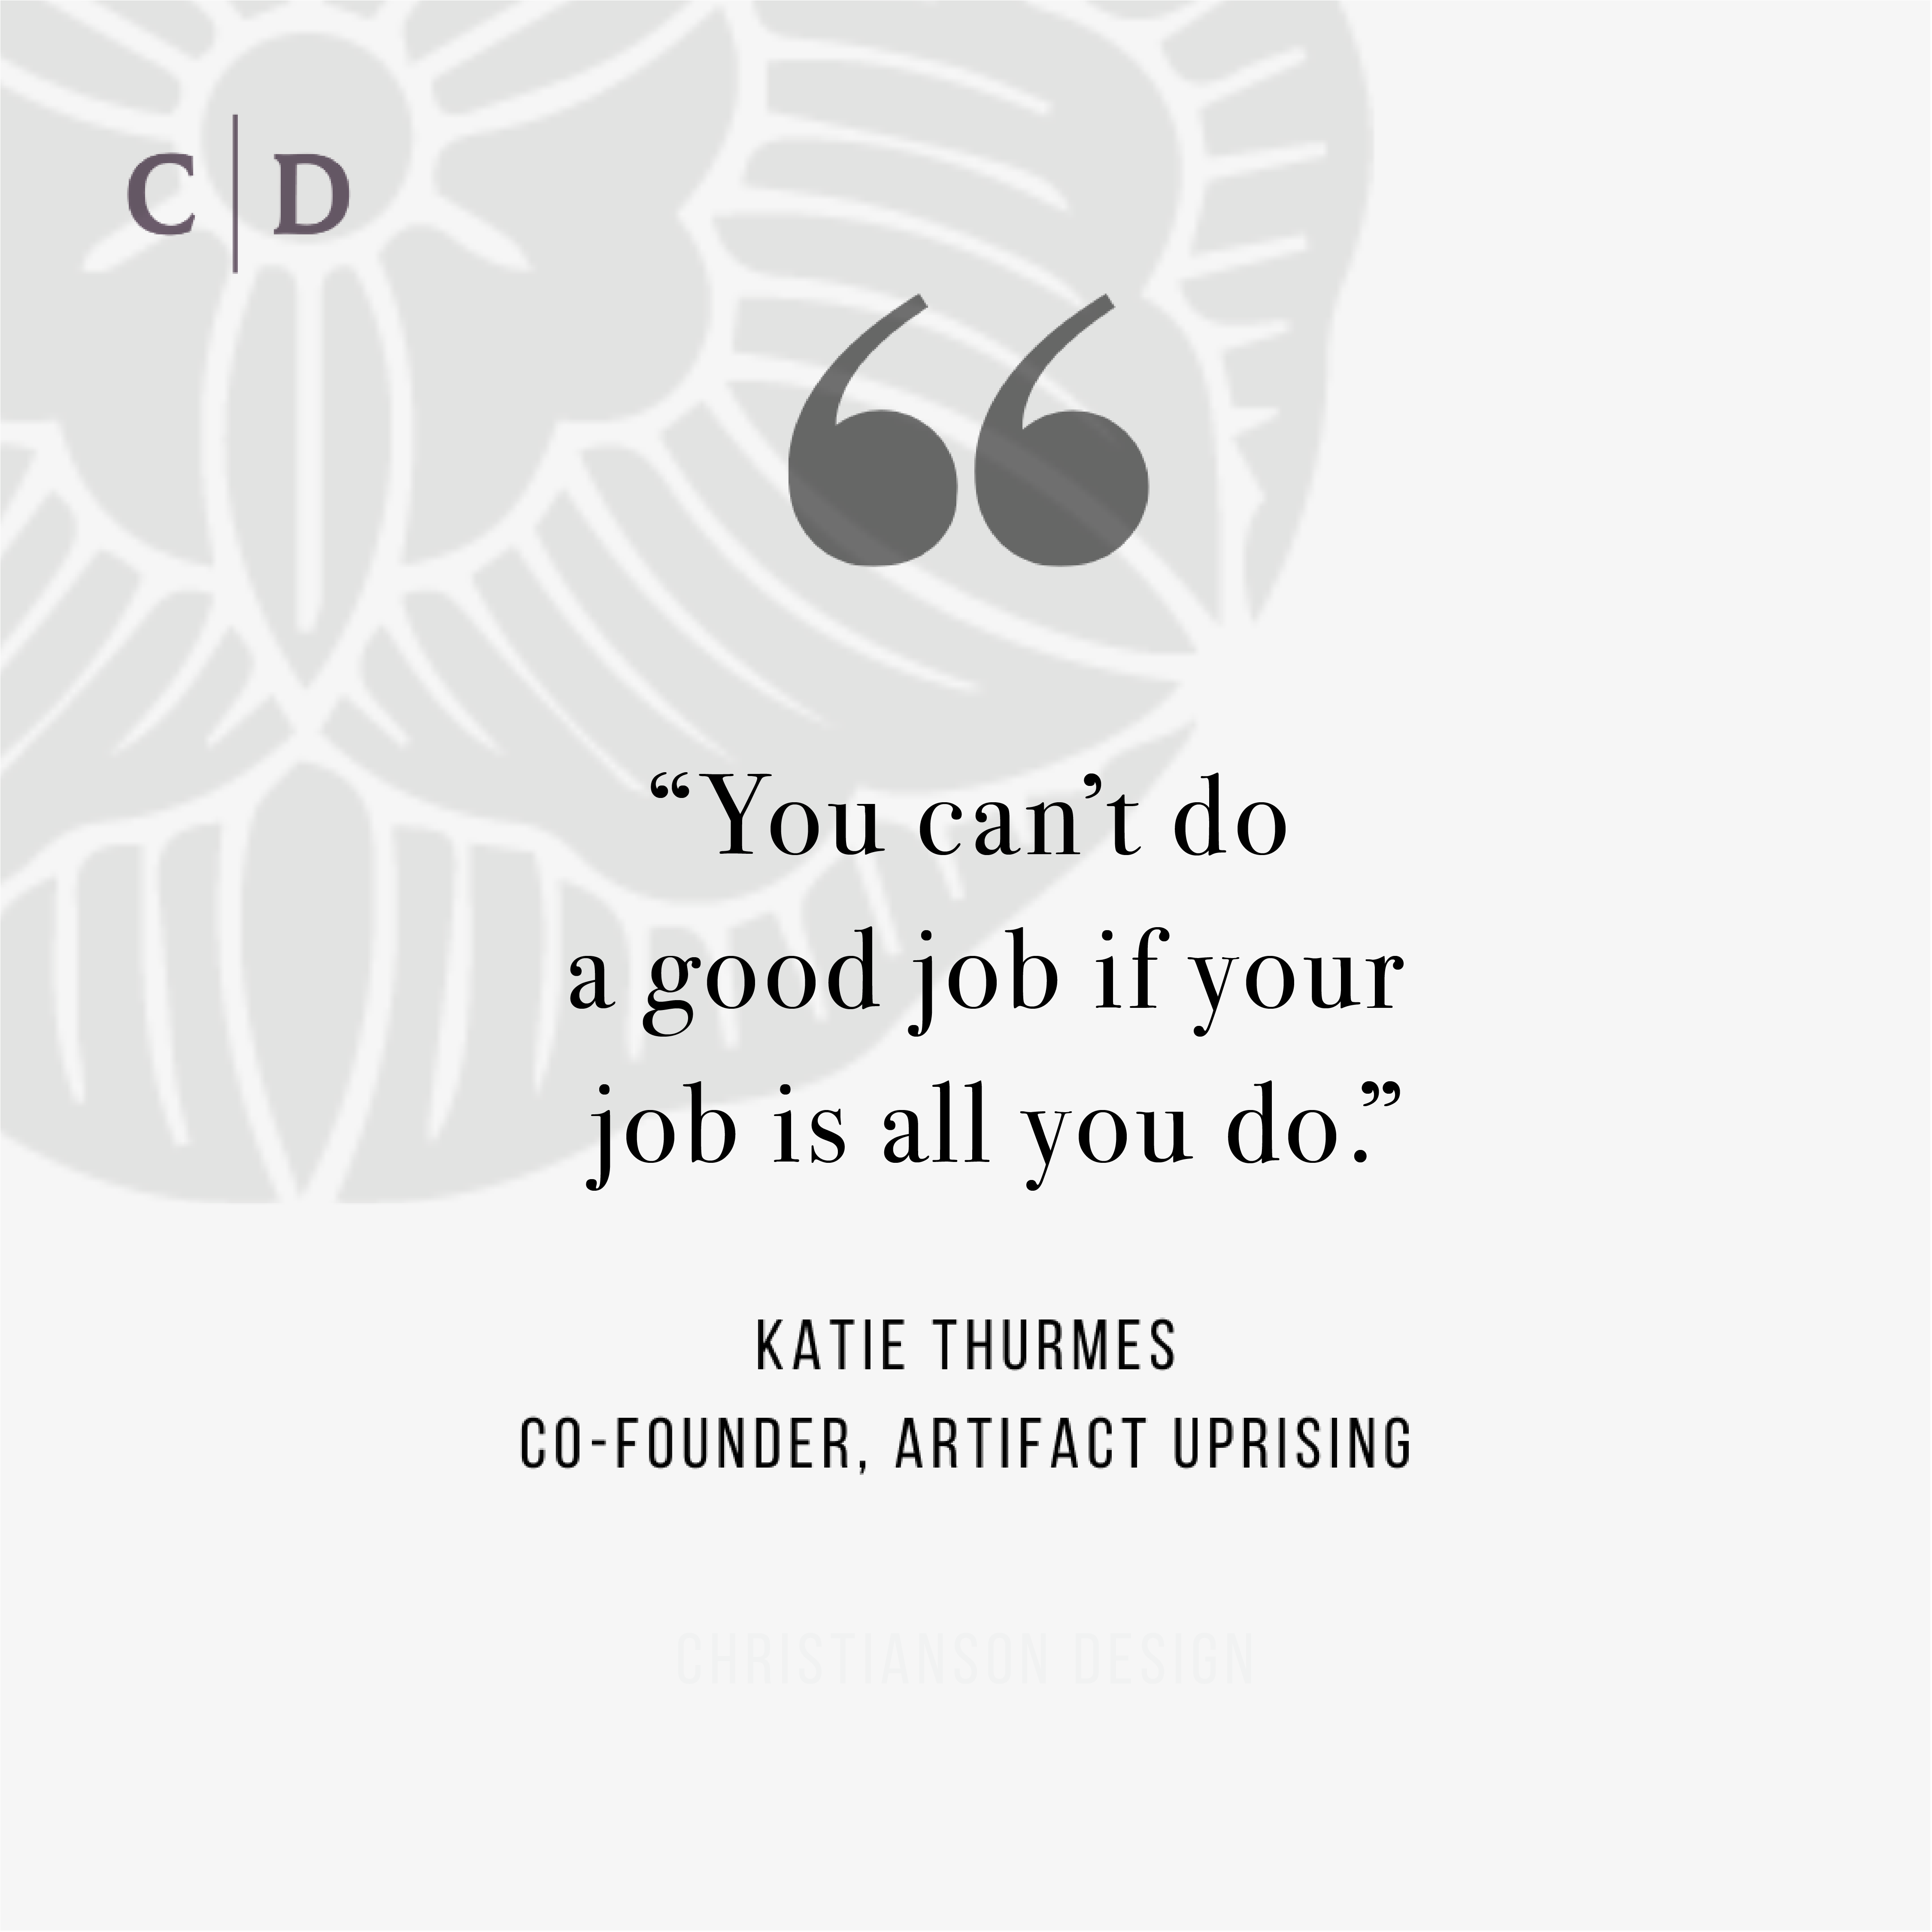 Square graphic with the quote "You can't do a good job if your job is all you do." by Katie Thurmes, Co-Founder of Artifact Rising